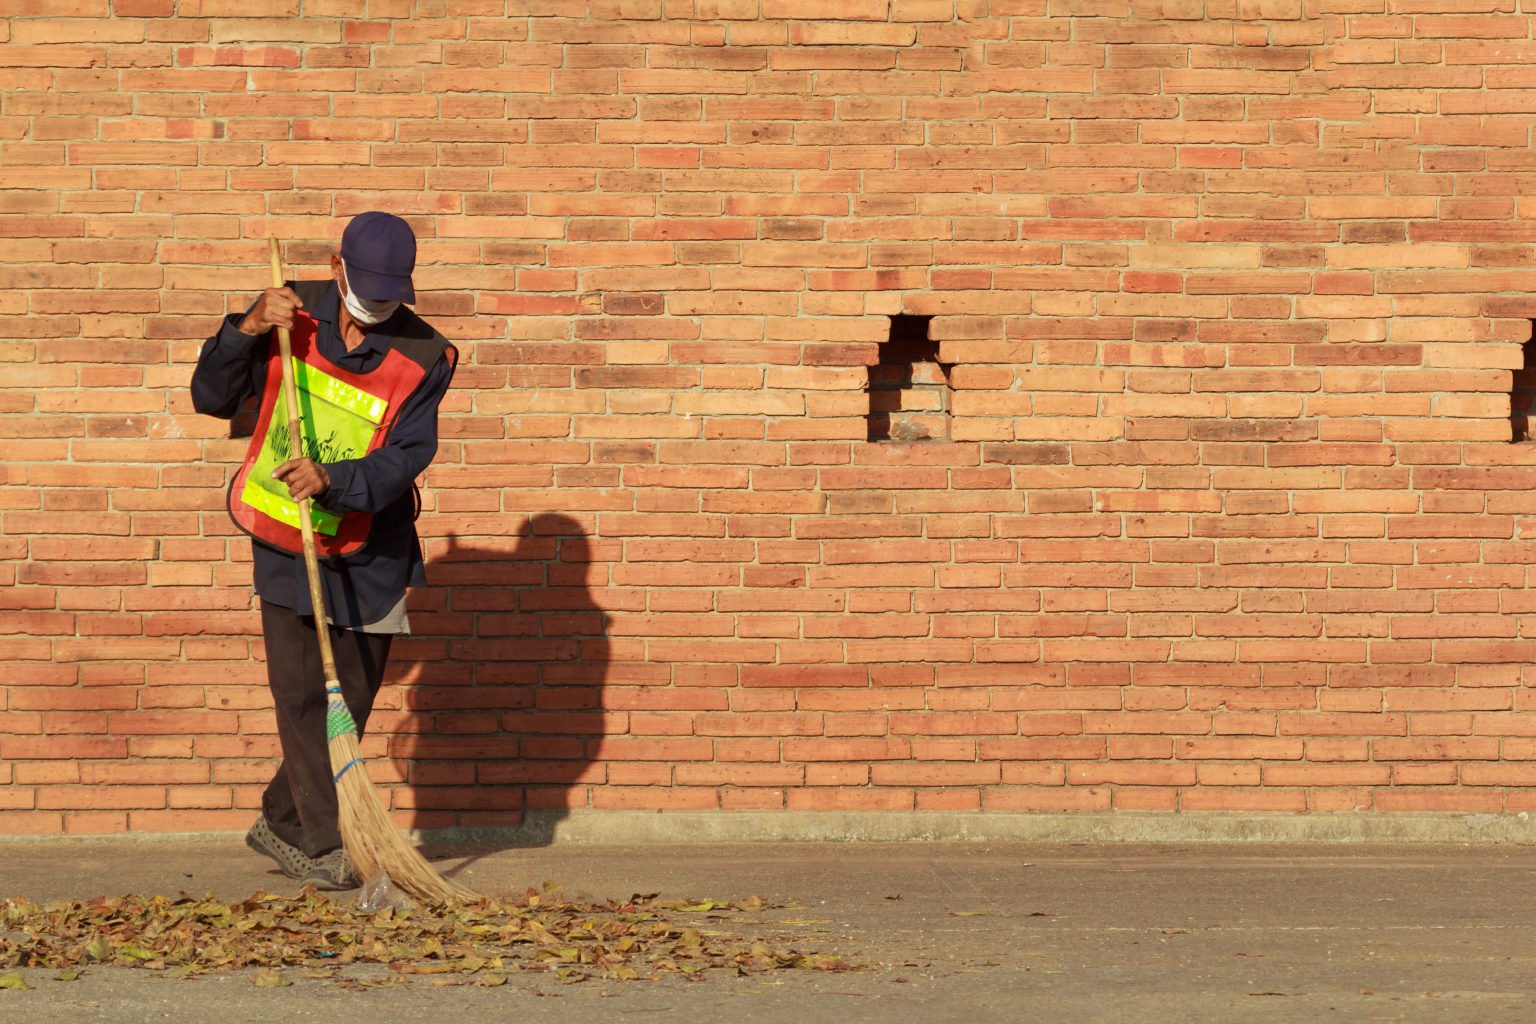 Scavenger,(local,Government,Staff),Sweeping,Leaves,On,Ground,With,Brick